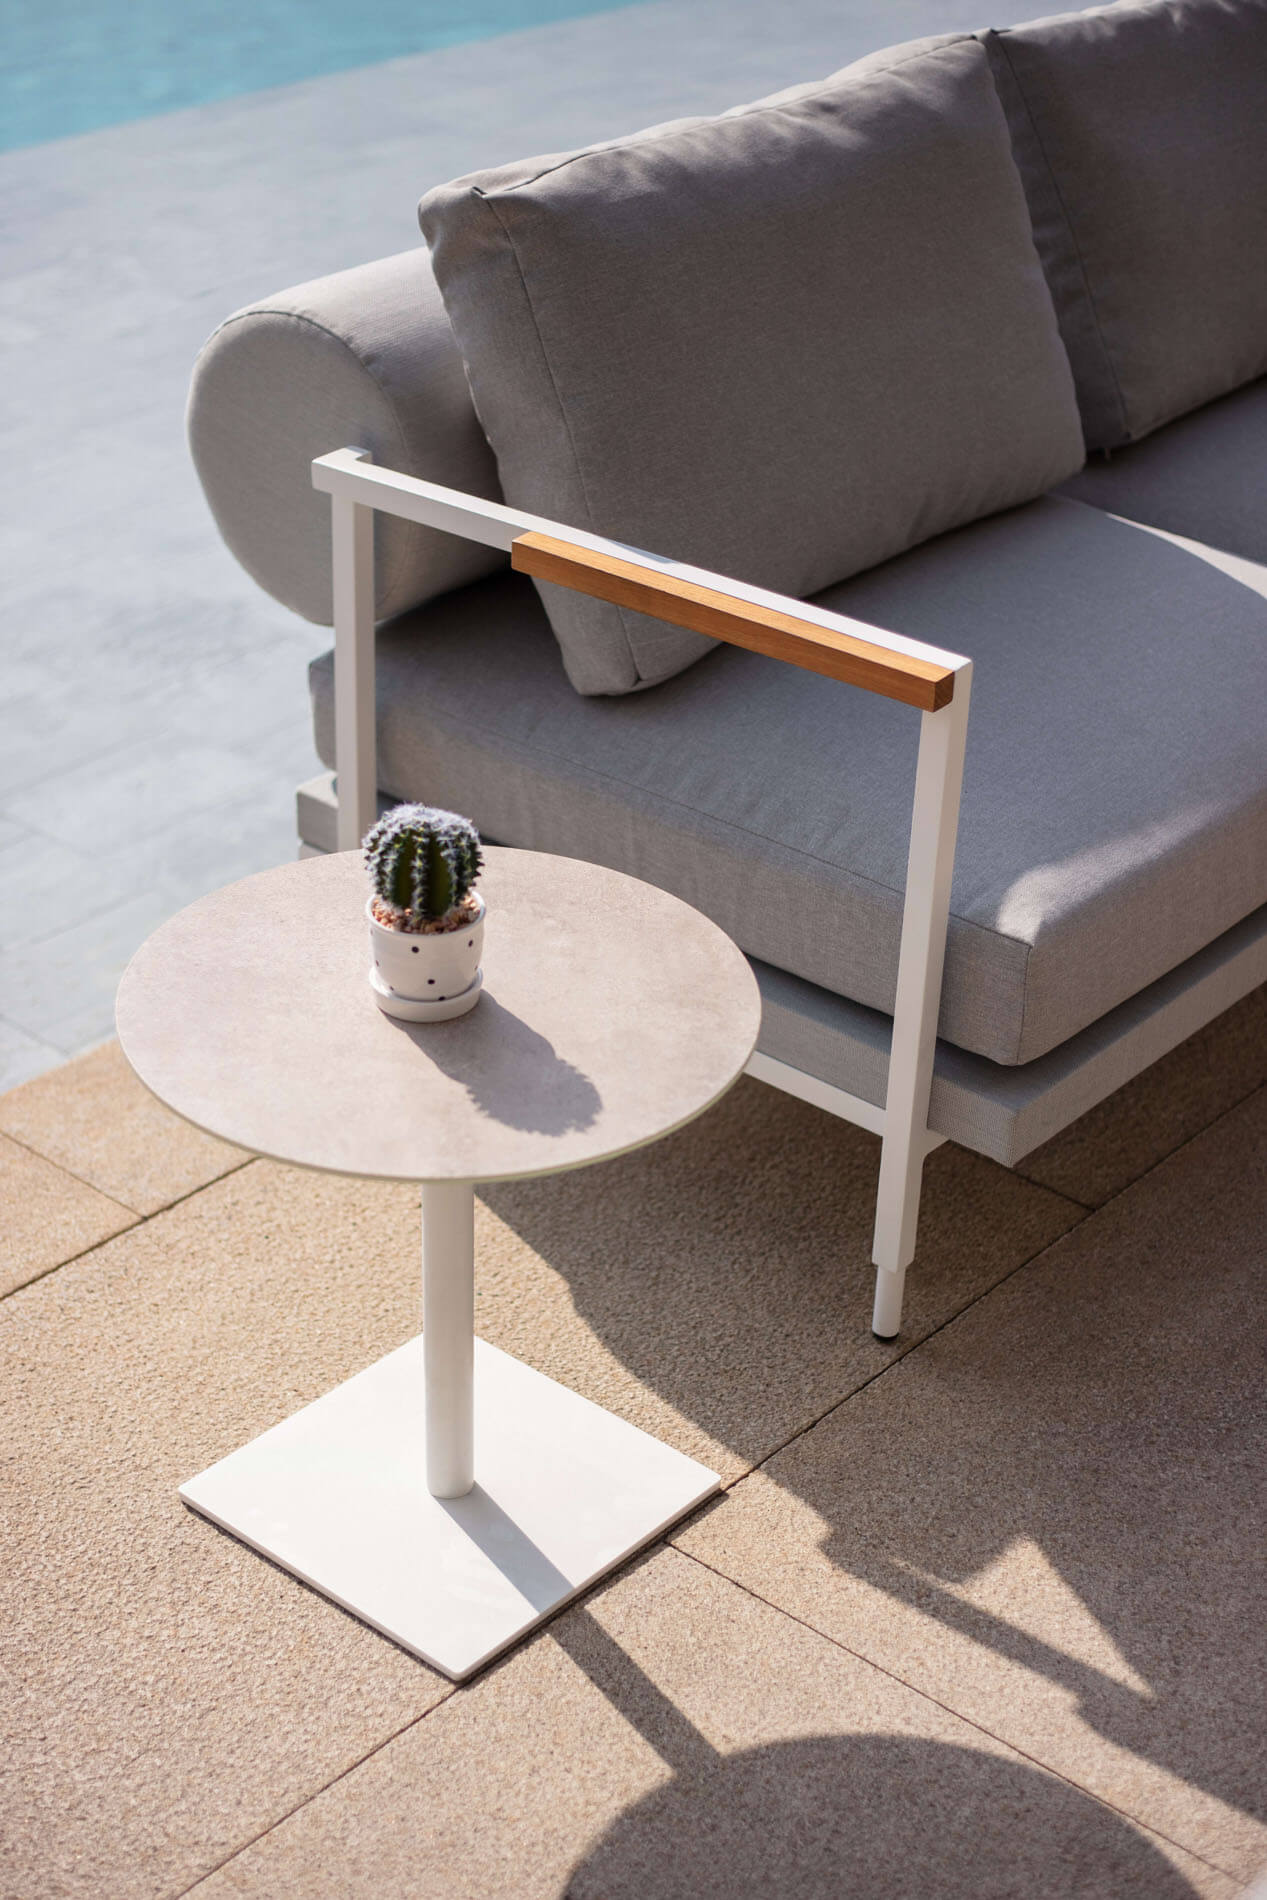 Poggesi Eden Side Table - A versatile and elegant addition to your space.